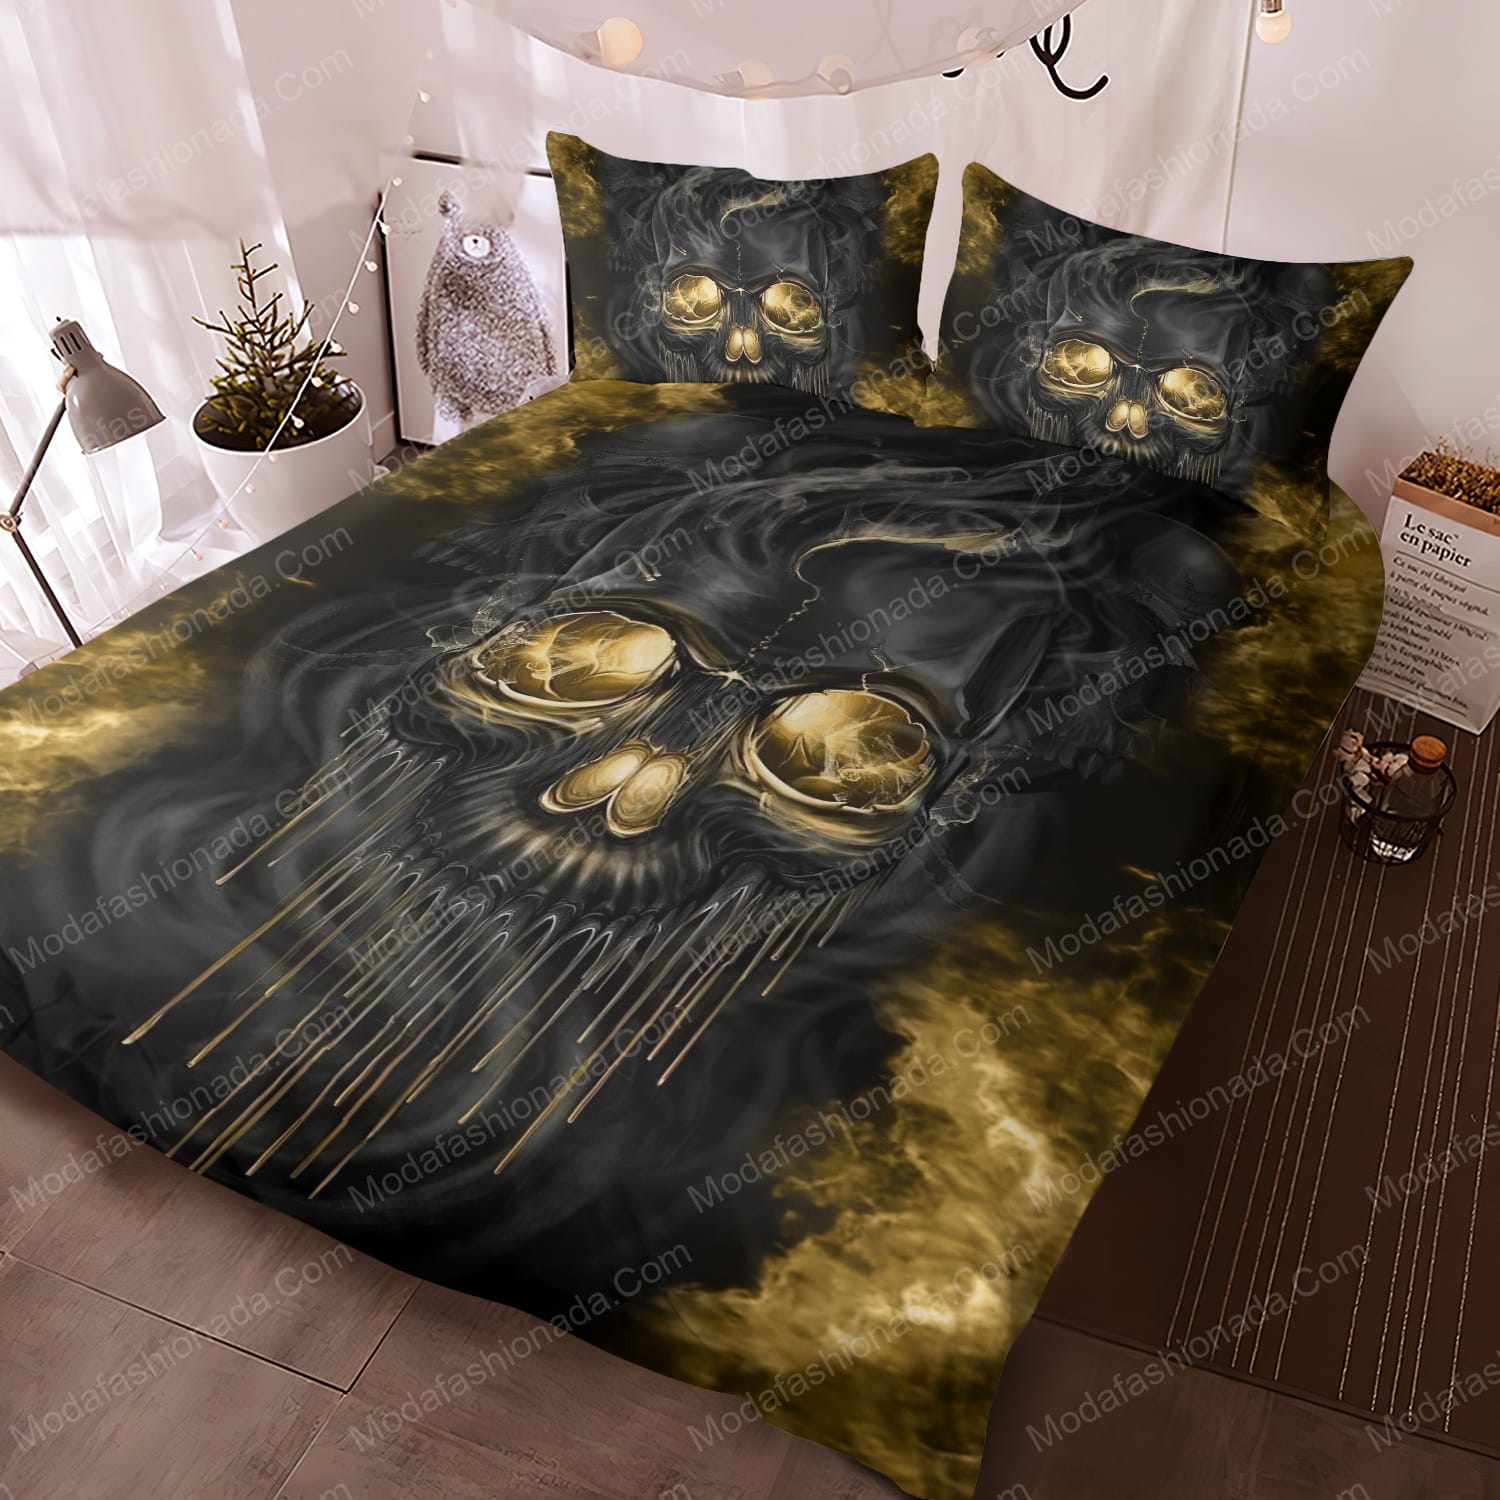 Buy Inferno Skull Halloween Bedding Sets Bed Sets With Twin, Full ...